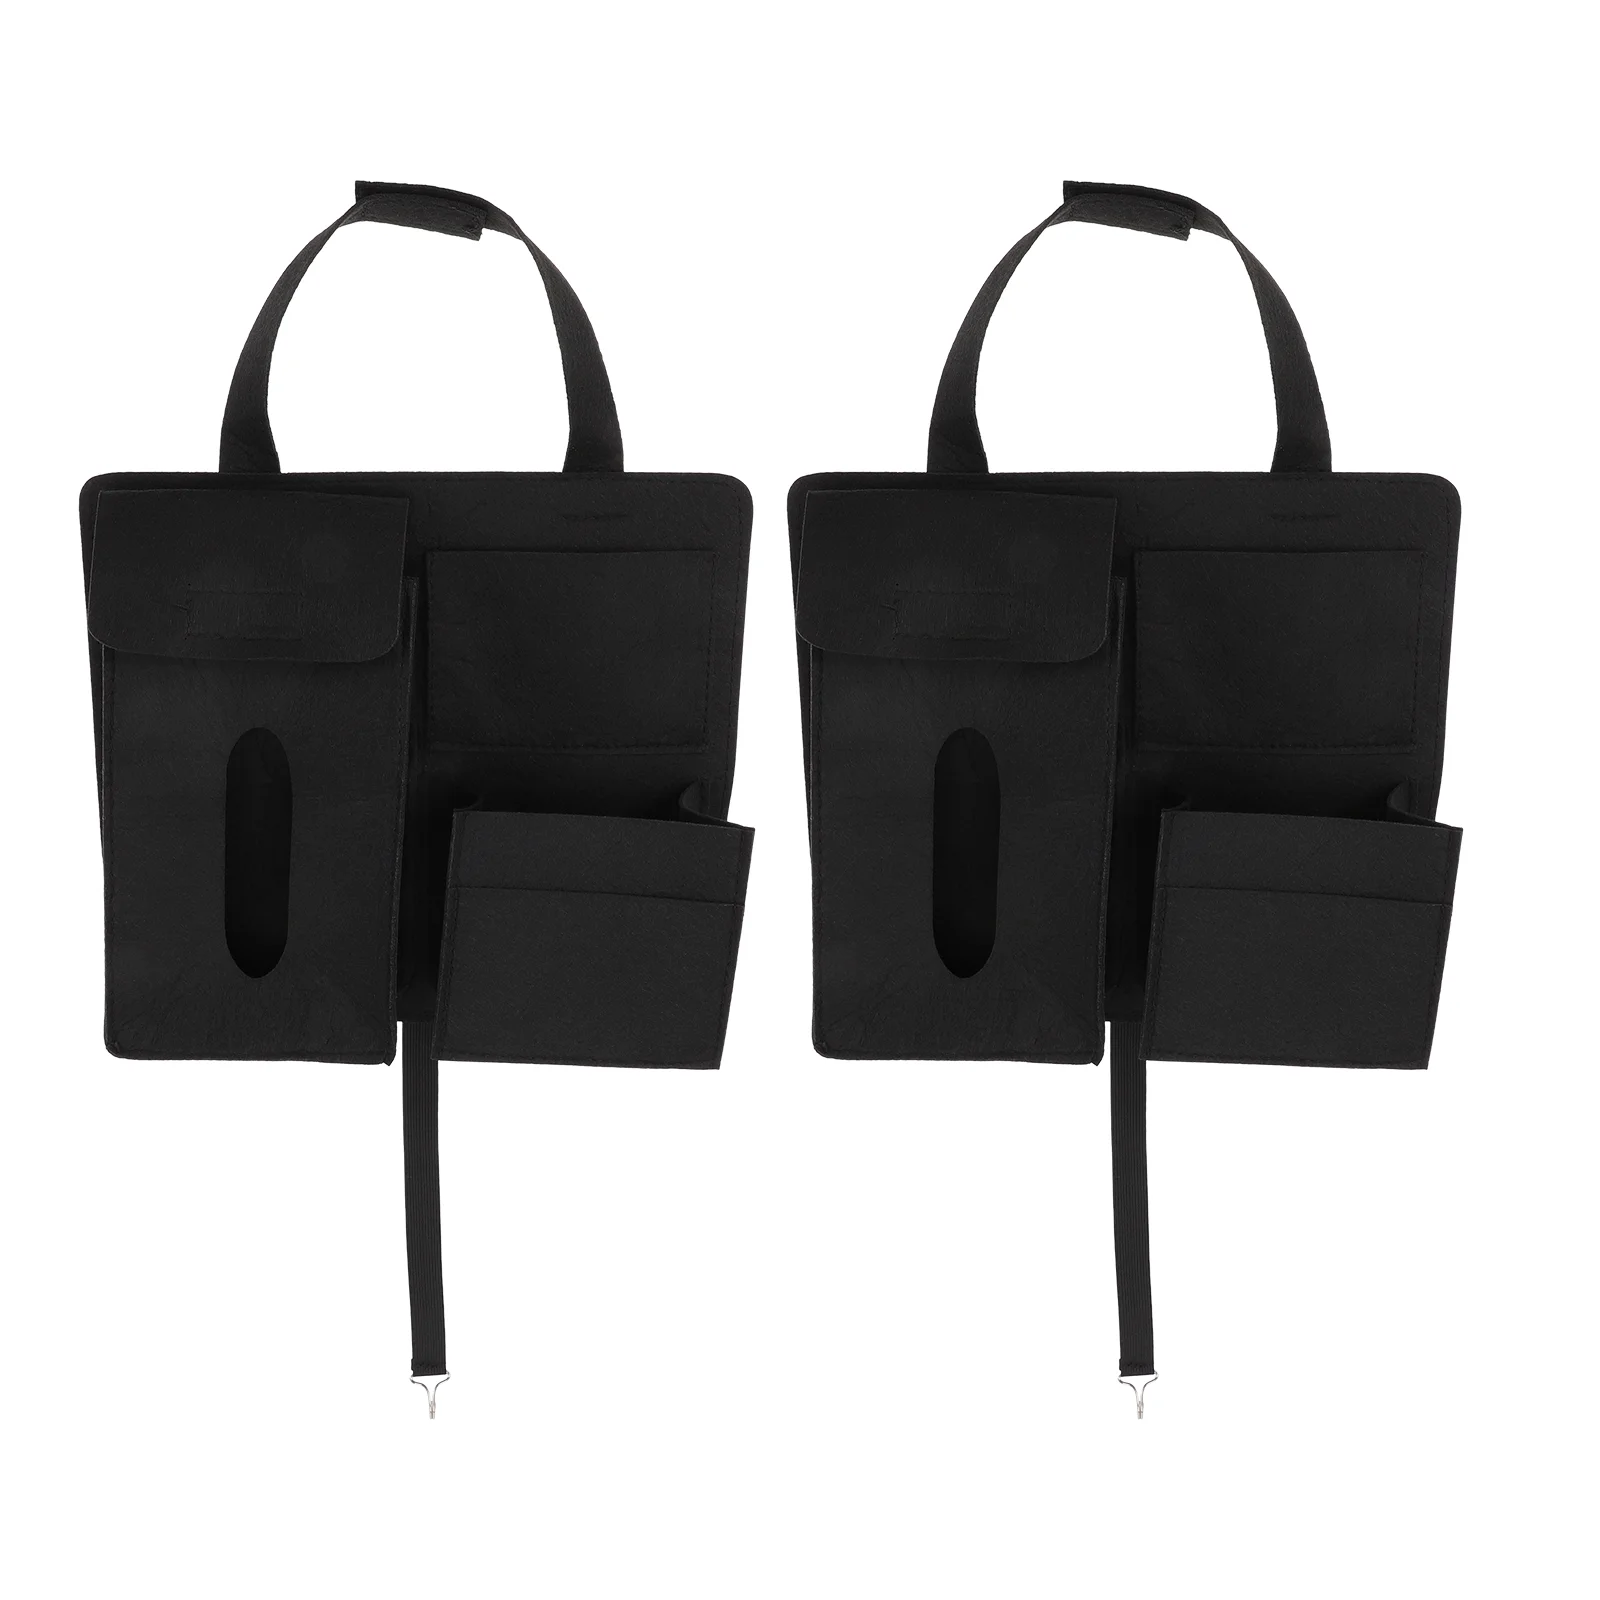 

2 Pcs Car Seat Bag Rear Storage Backseat Organizer Toy for Baby Pockets Seats Hanging Pouch Felt